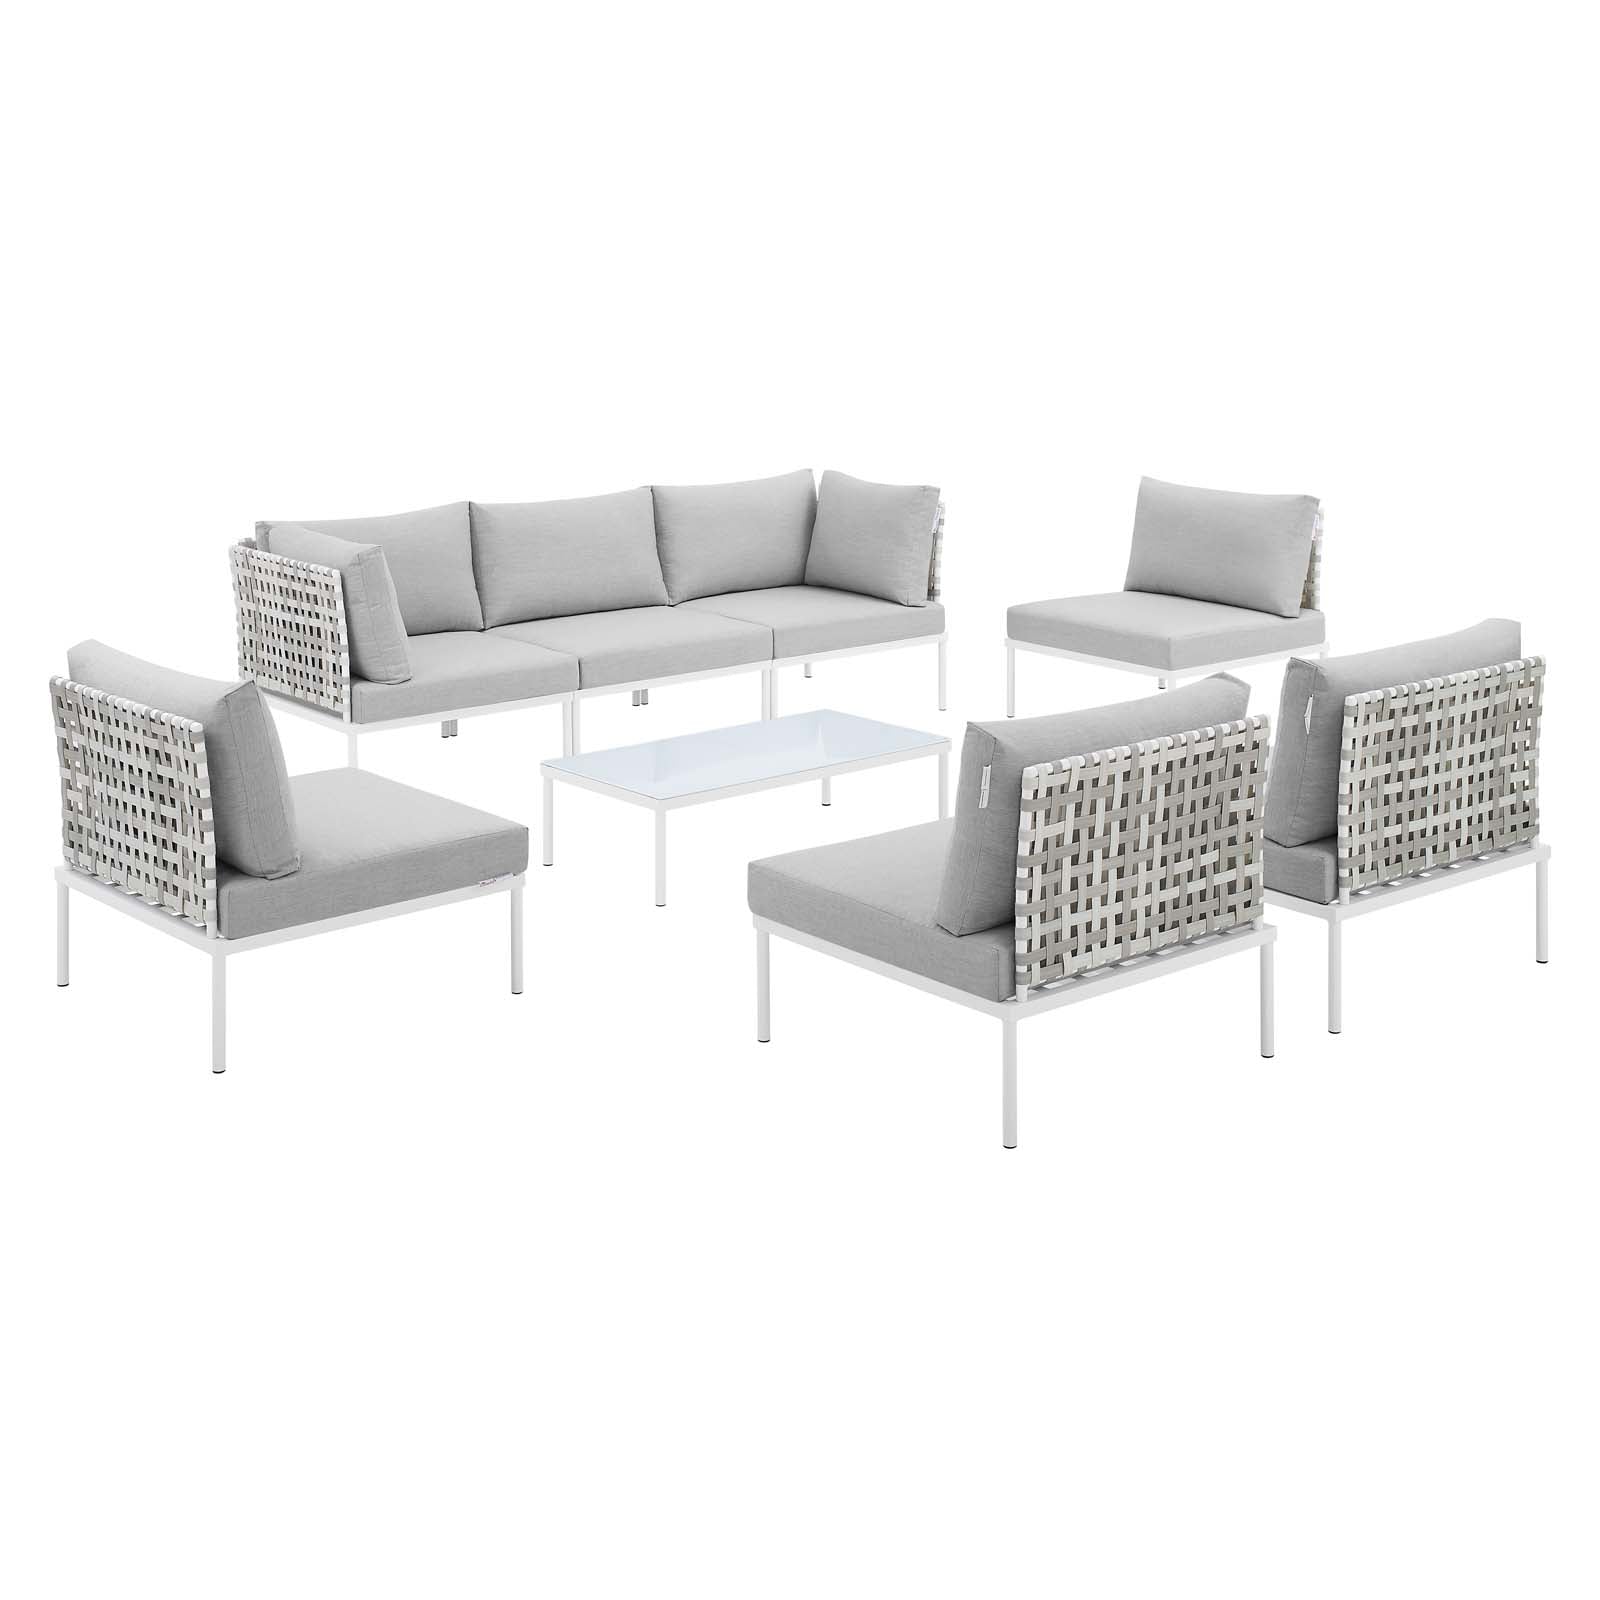 Modway Outdoor Conversation Sets - Harmony 8 Piece Sunbrella Basket Weave Outdoor Patio Sectional Sofa Set Taupe Gray